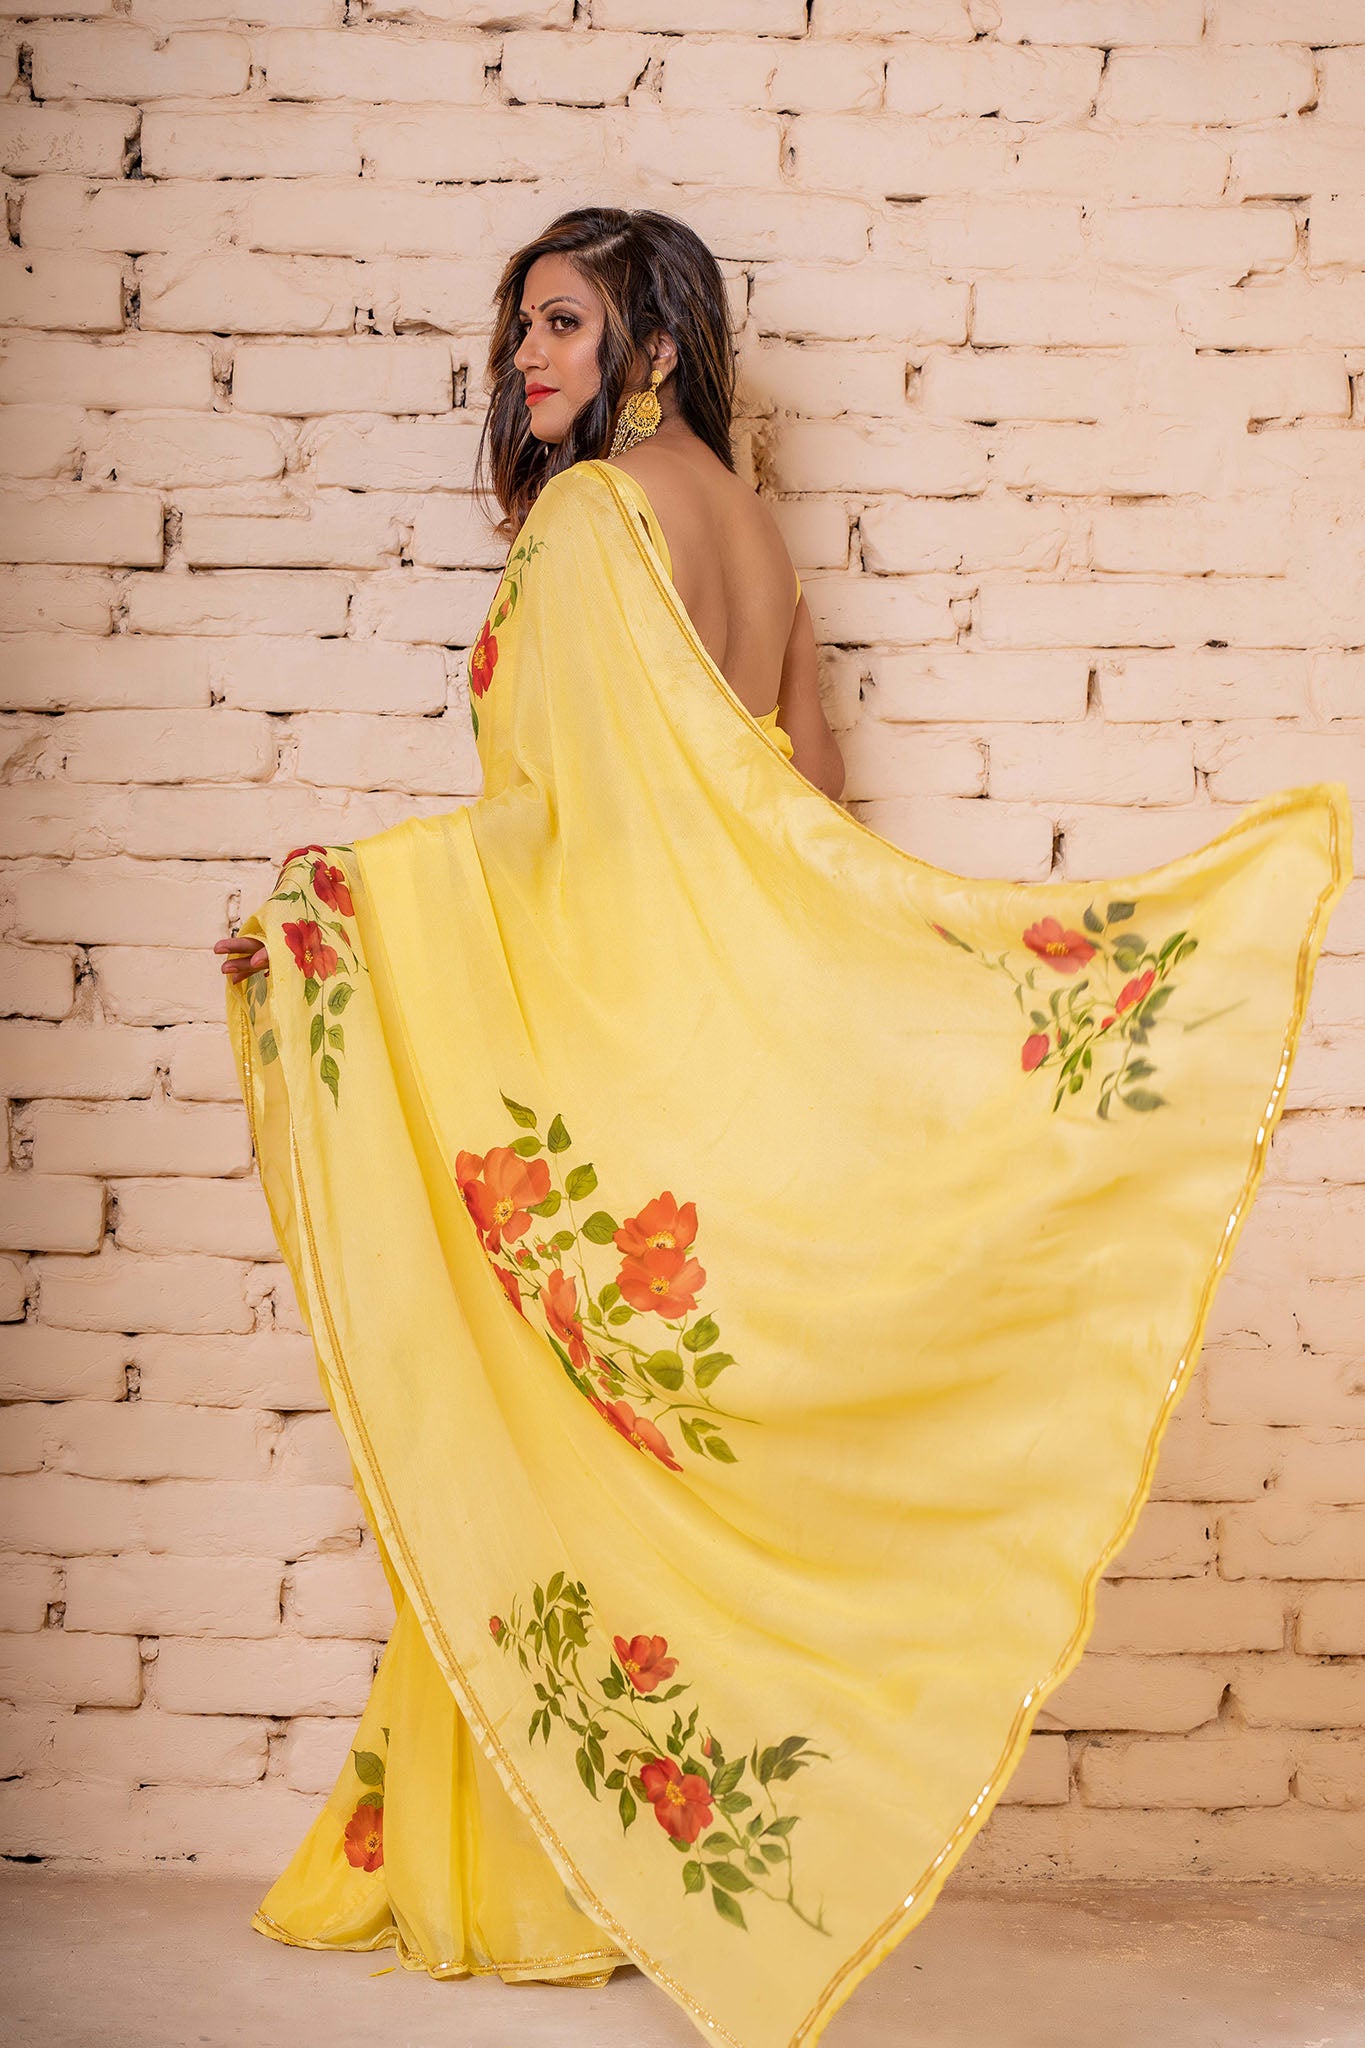 Explore our hand-painted sarees, a fusion of artistry and elegance. Find the perfect hand-paint sari, whether it's a floral chiffon saree for a funky look or a beautiful handloom saree that's trending now. Elevate your style with a Bollywood saree or go rustic with a crêpe silk embroidered saree. Discover the finest in craftsmanship and fashion.